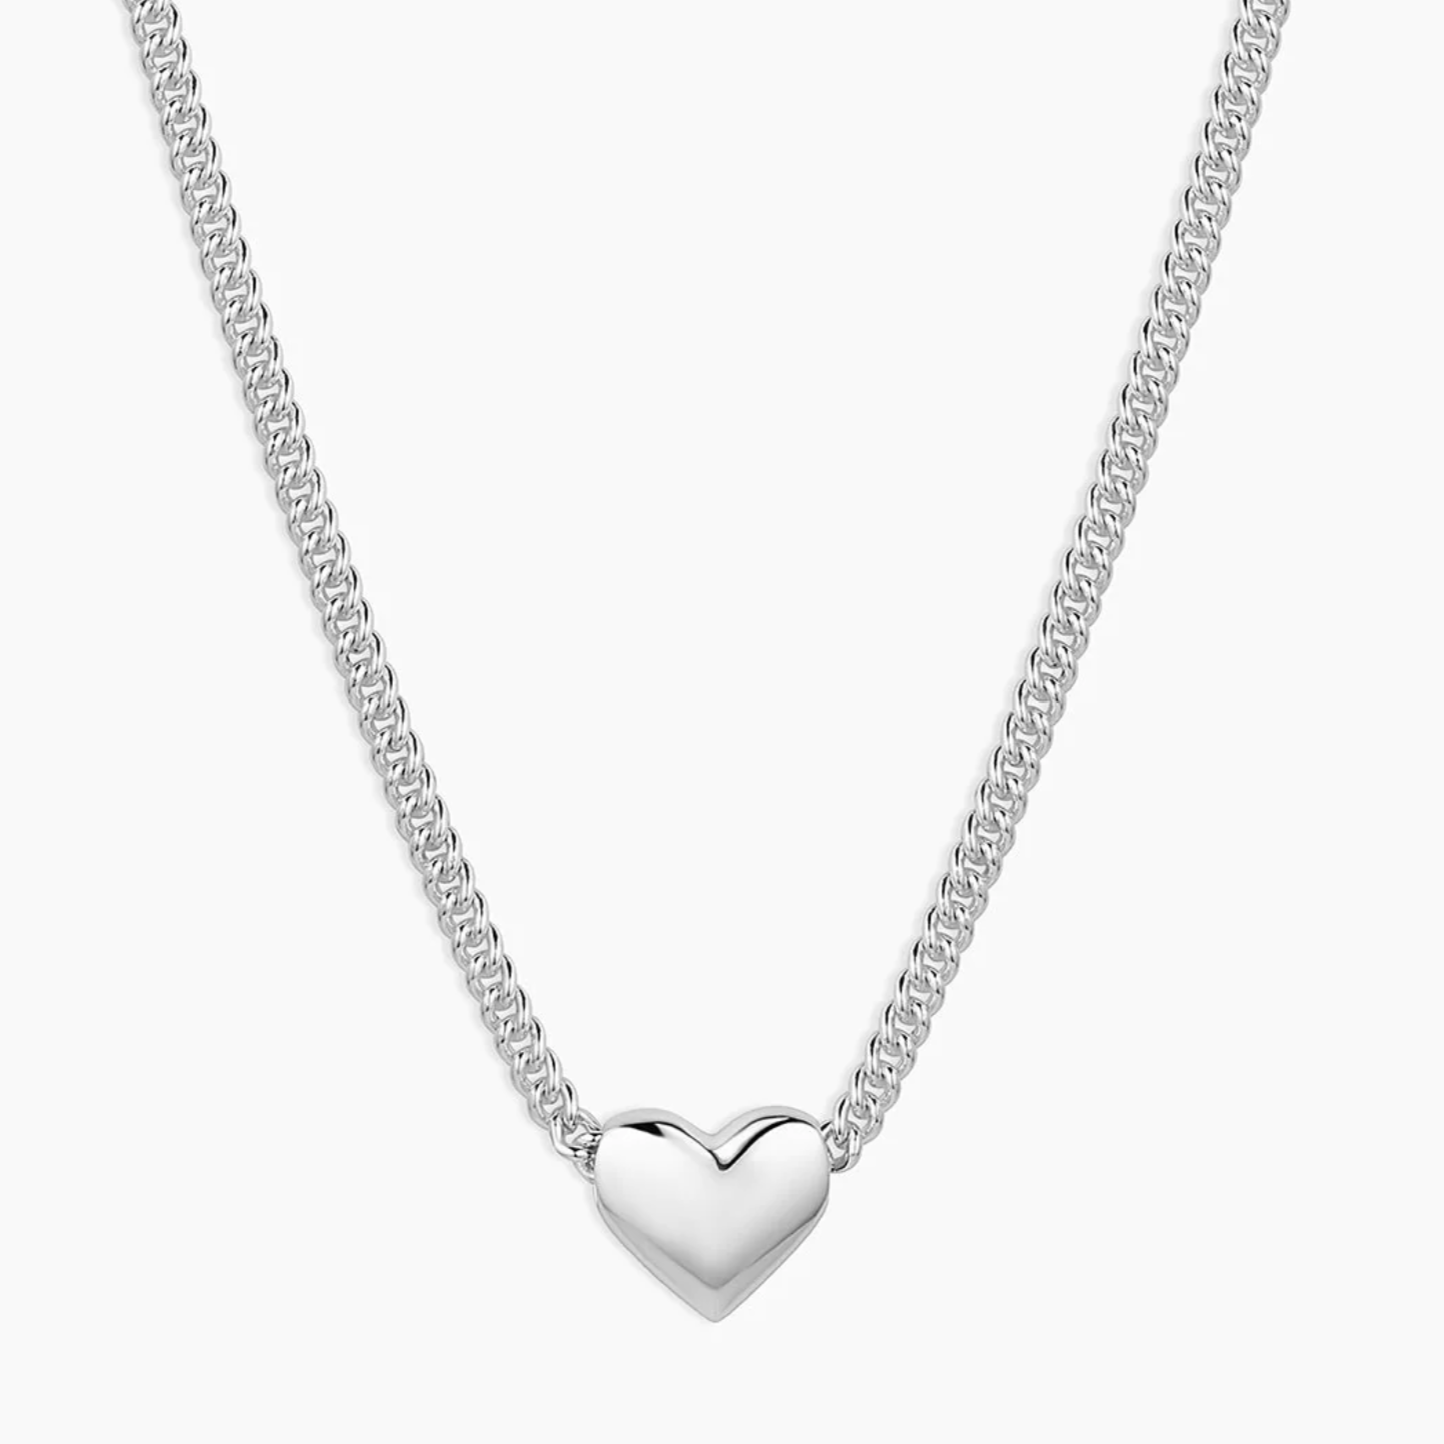 Lou Heart Charm Necklace in Silver